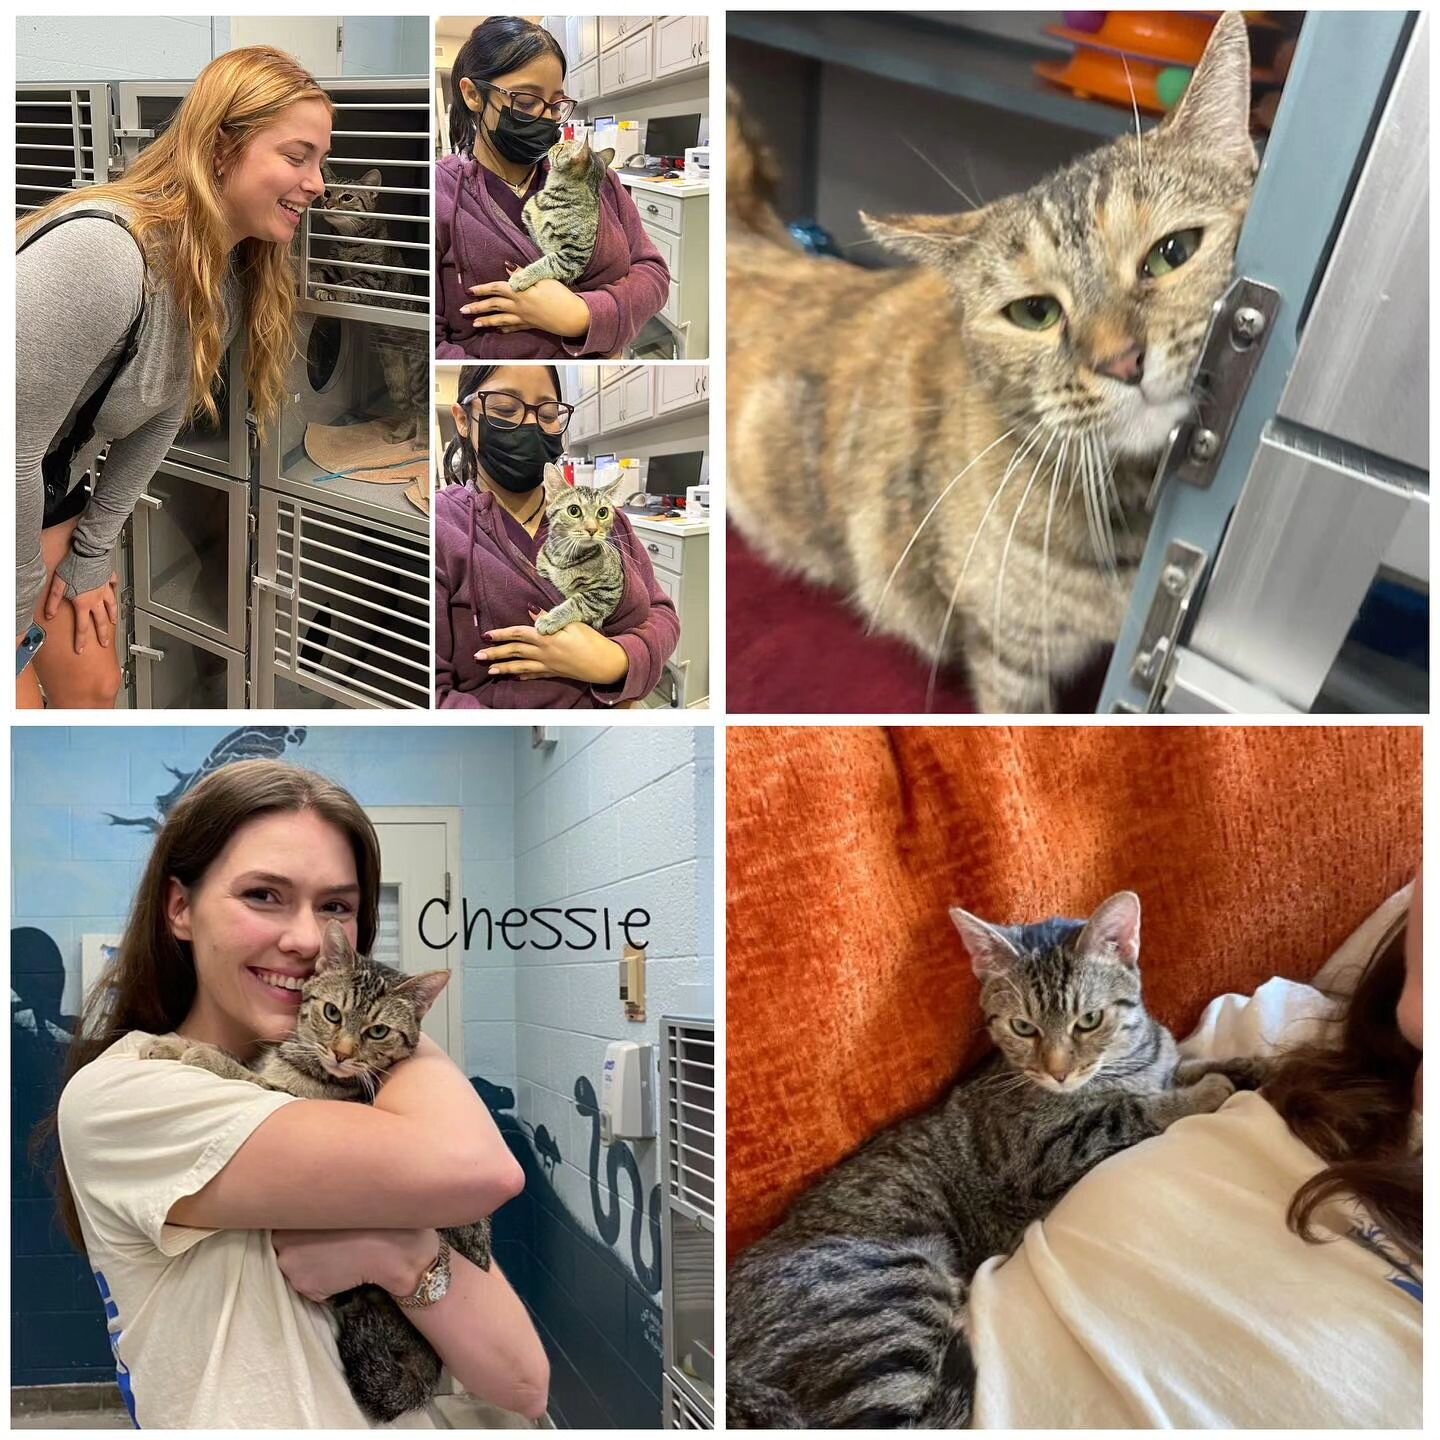 Happy life sweet Chessie! We are honored to have been a part of your journey ! &hearts;️🏡🐈

Reposted from @agouraanimalslaco

Chessie was found by a Good Samaritan (their sweet reunion top left❤️). She had been severely injured, likely hit by a car